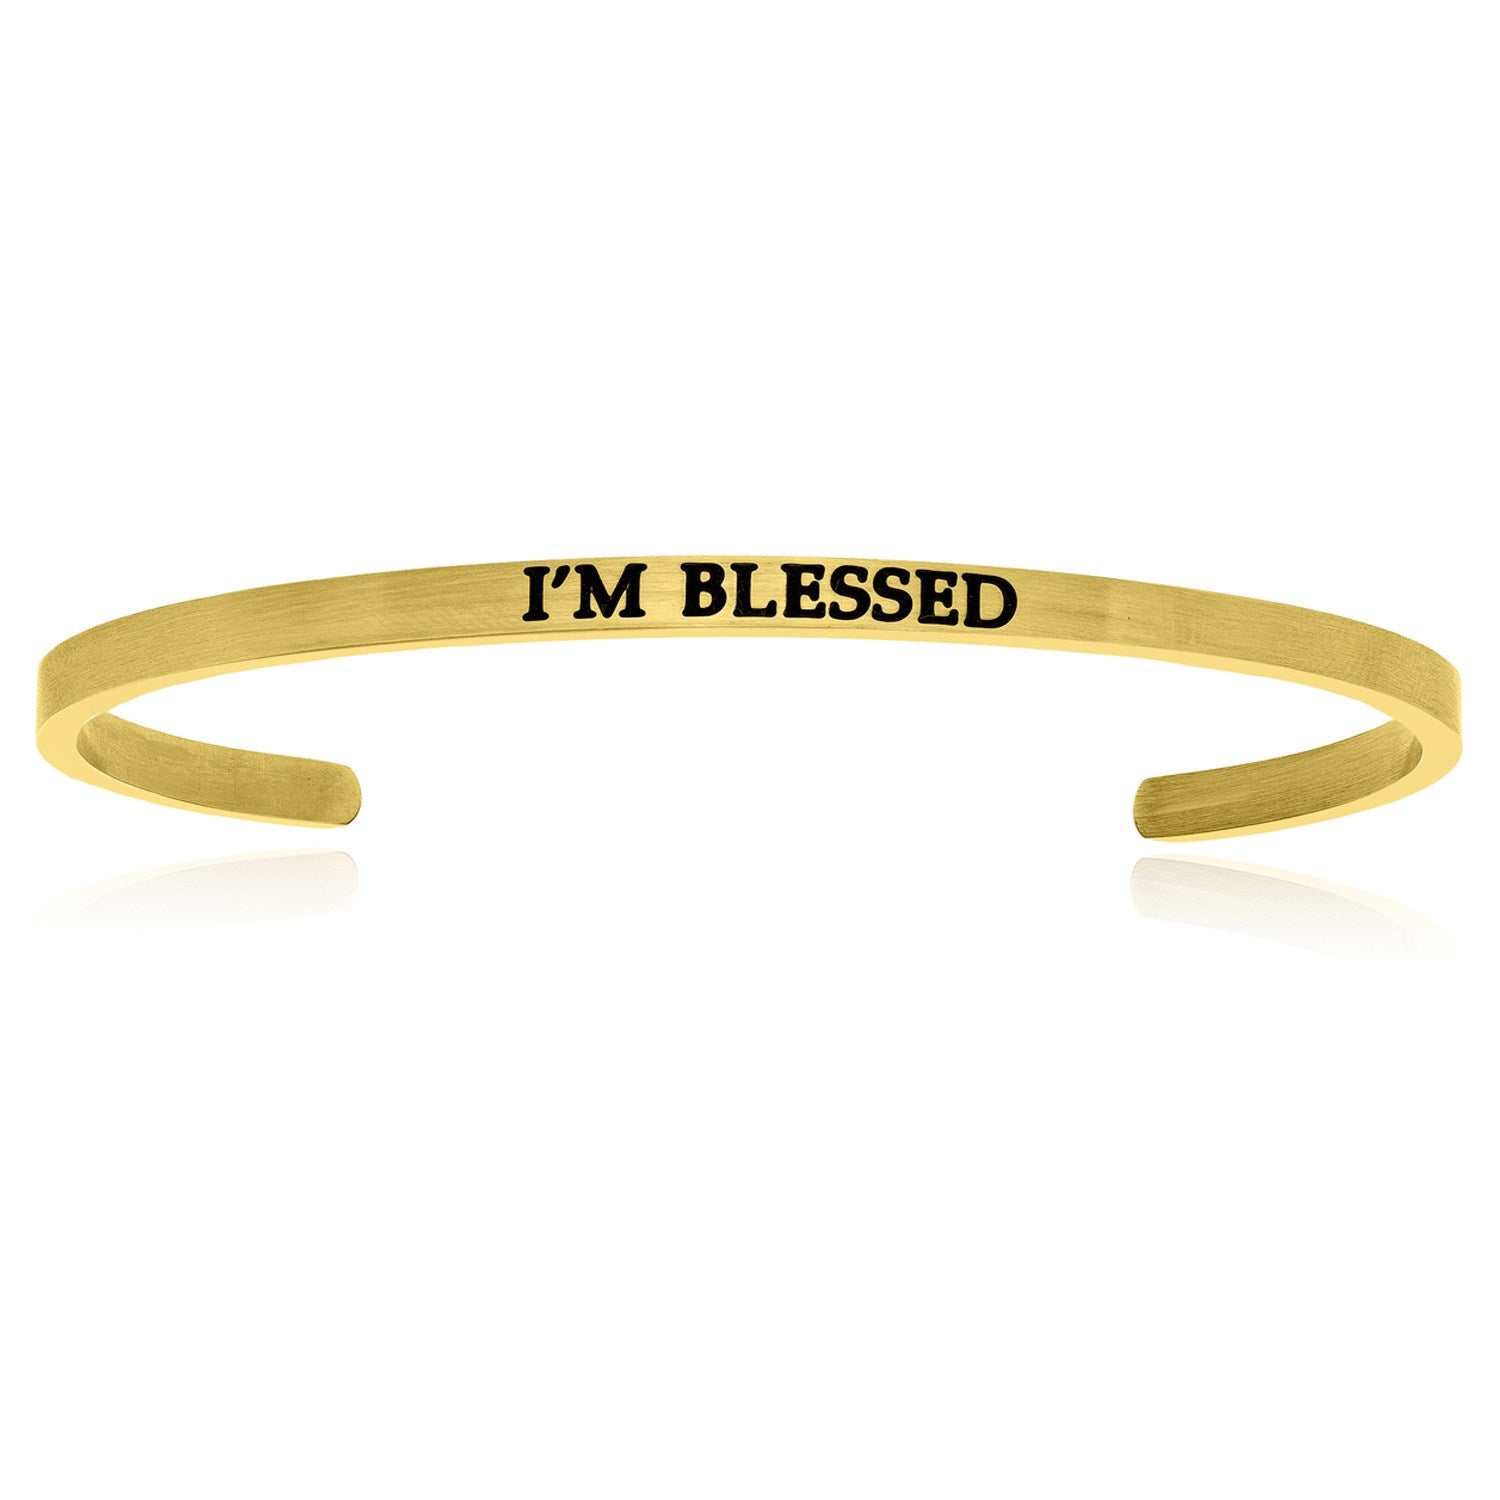 Yellow Stainless Steel I'm Blessed Cuff Bracelet